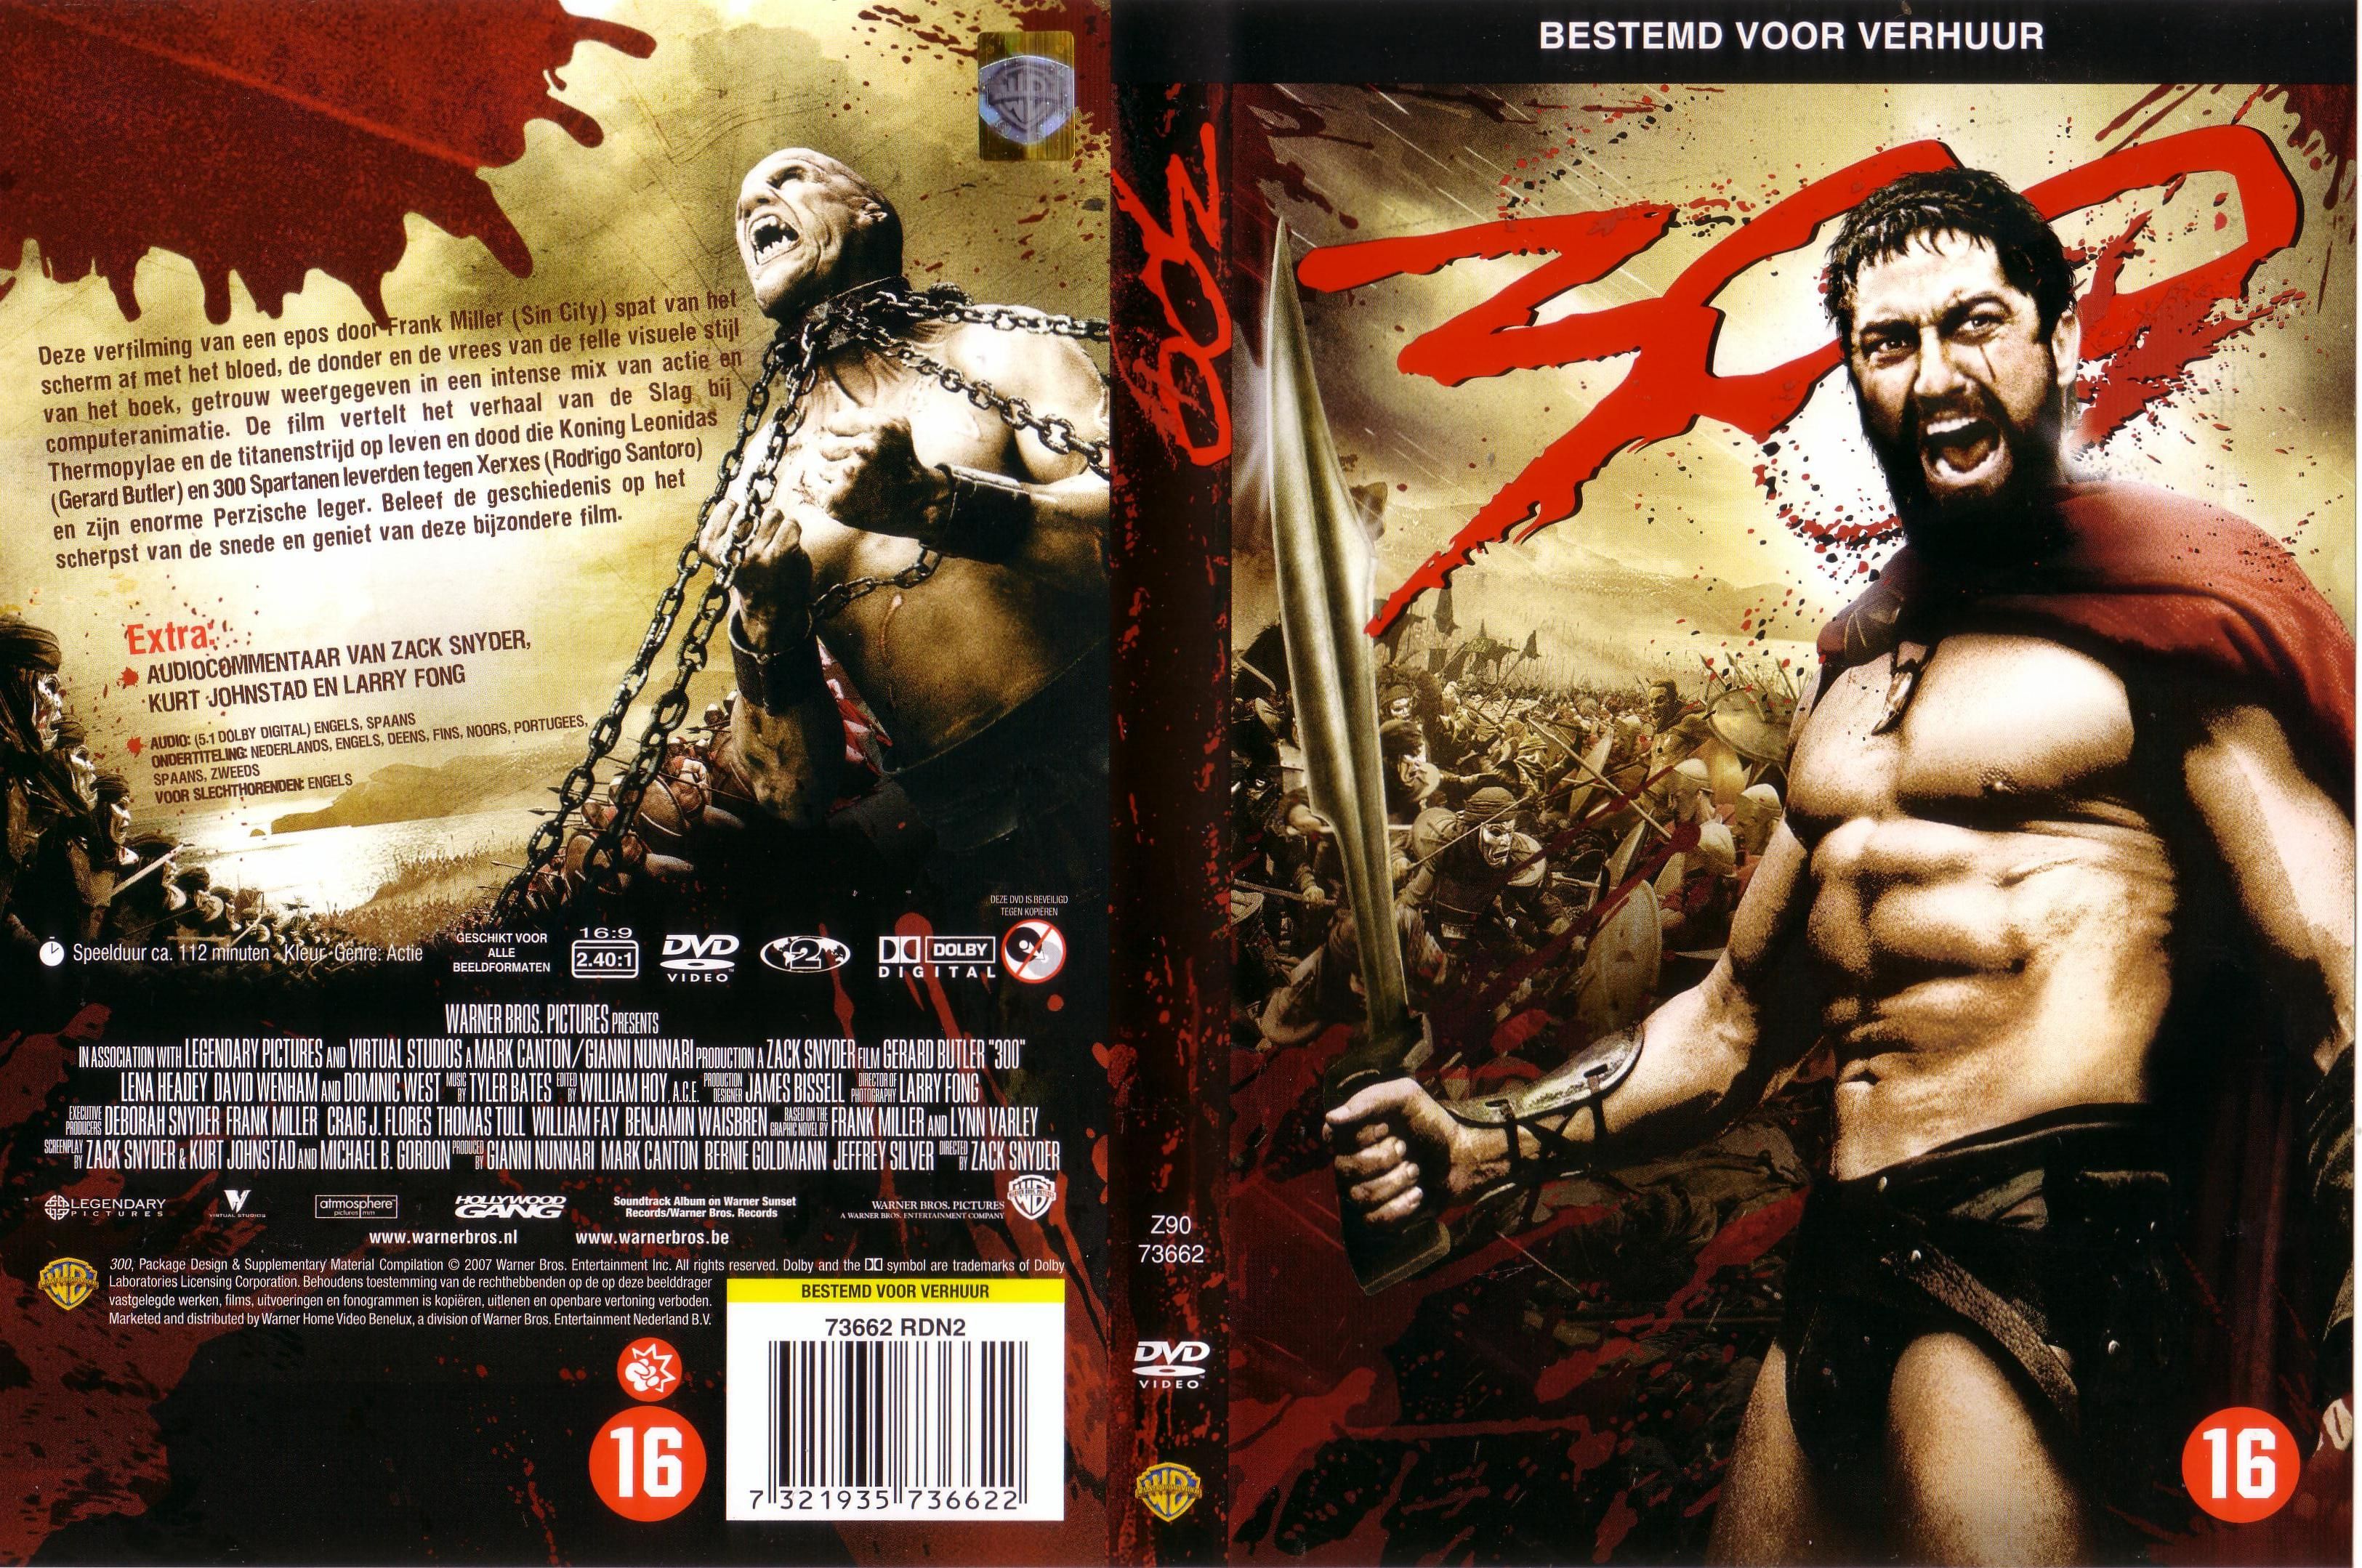  300  DVD  NL DVD  Covers Cover Century Over 500 000 